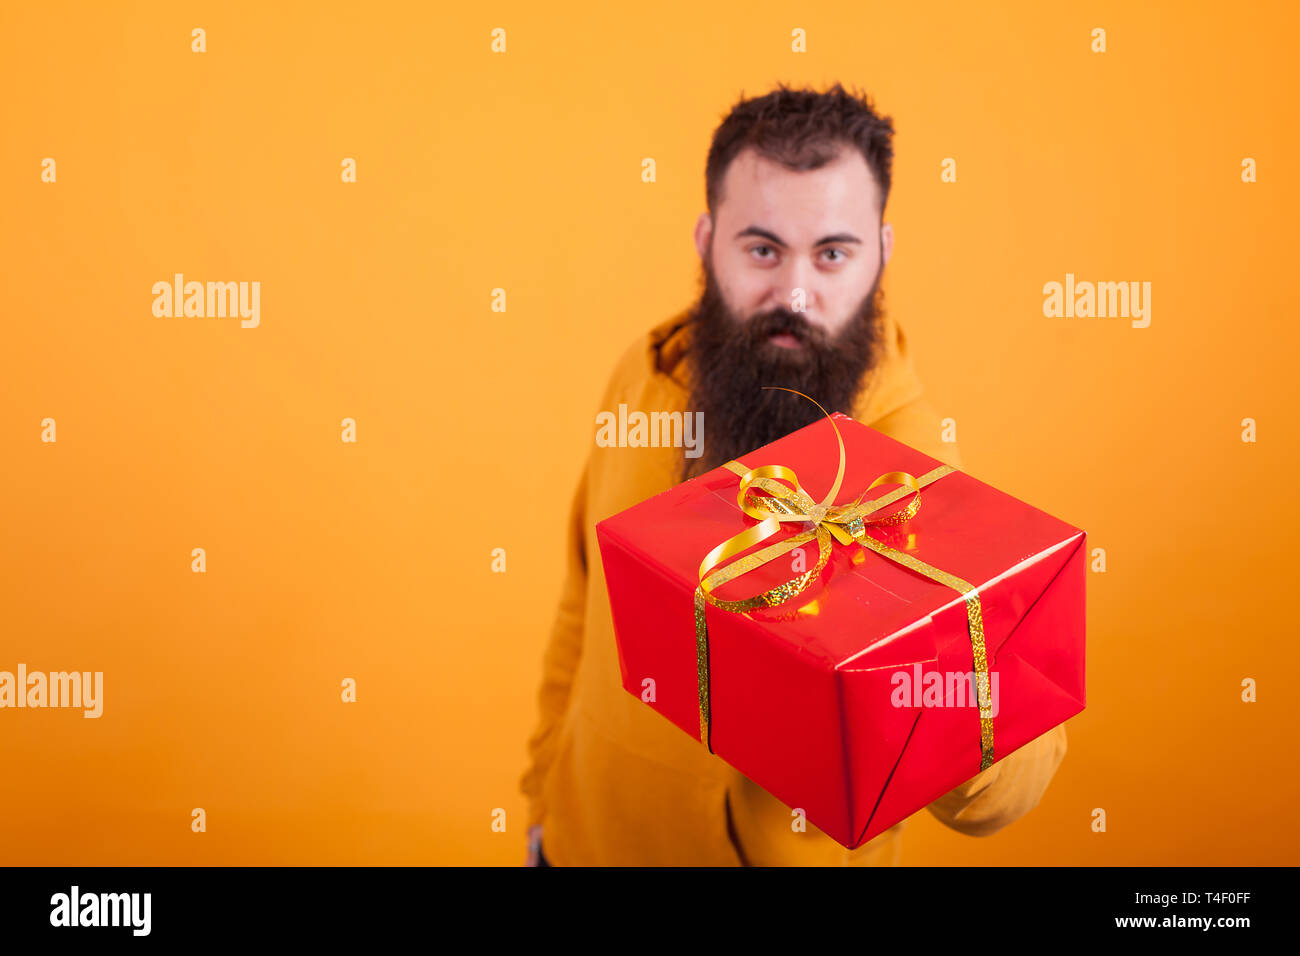 Attractive bearded man wearing yellow hoodie shoing red gift box over yellow background. Giving red gift box. Stock Photo